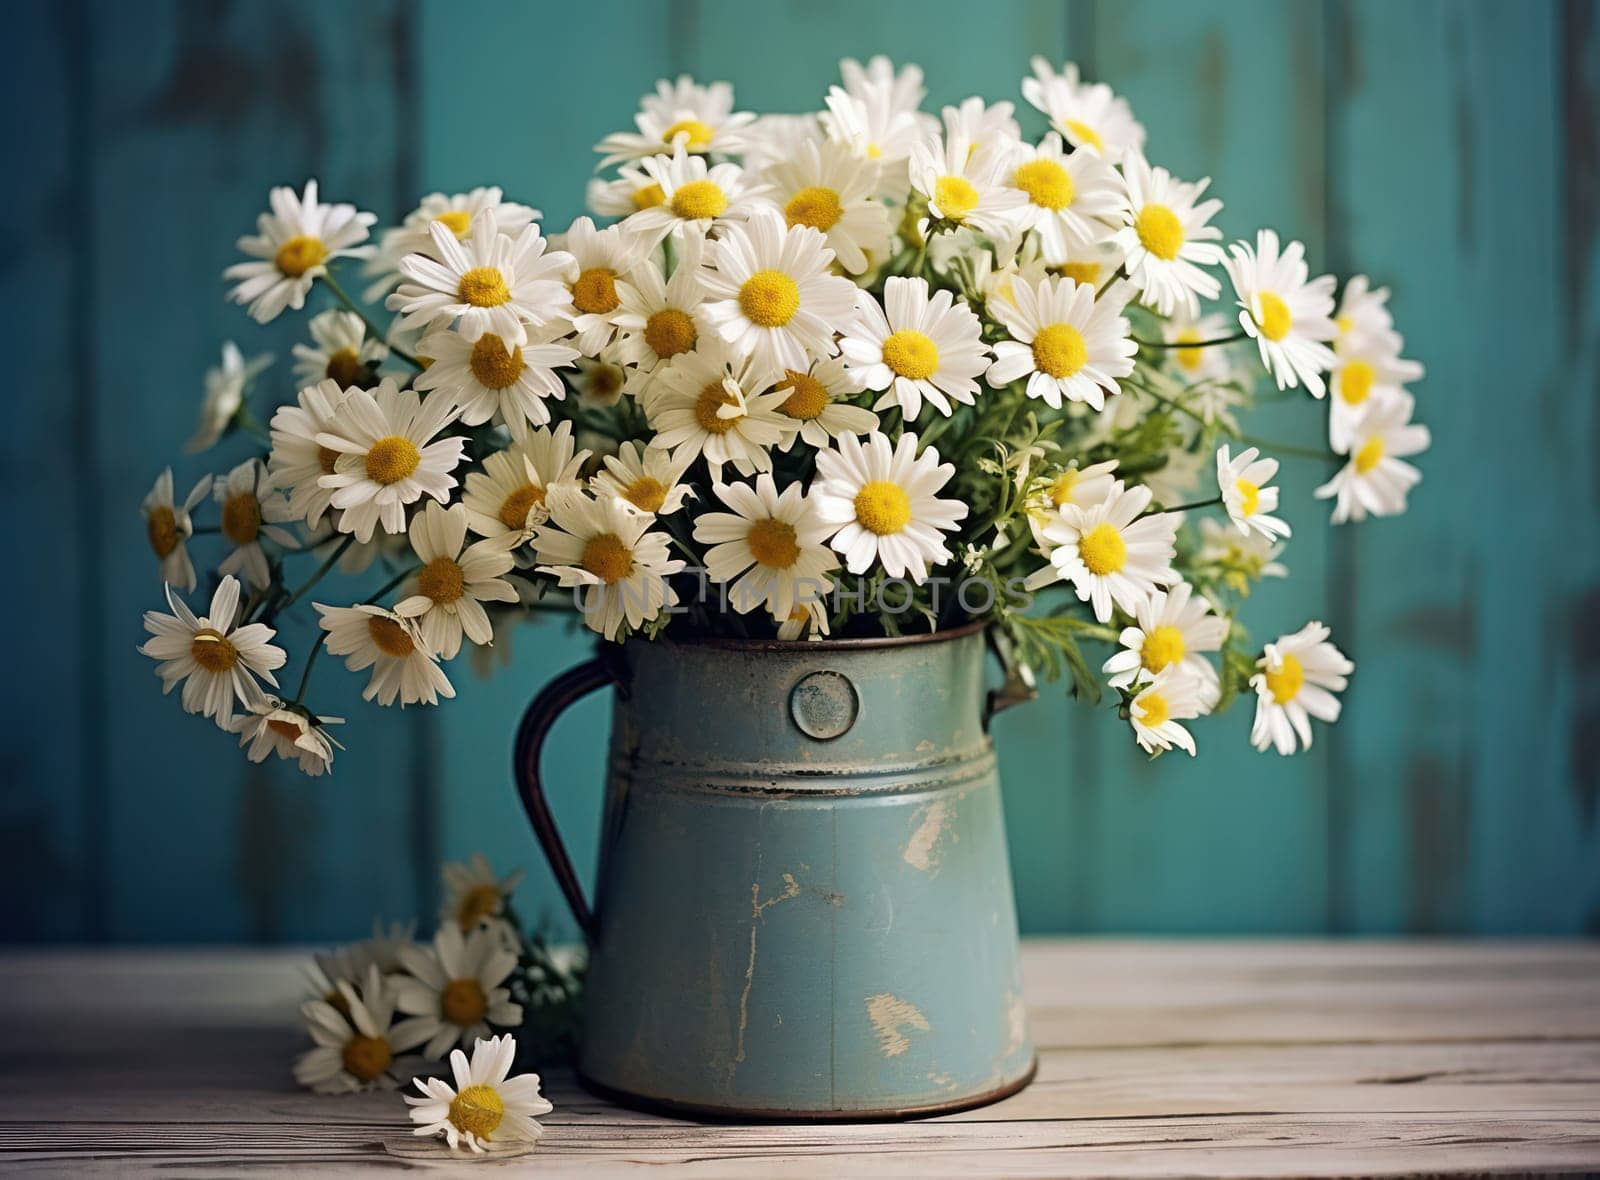 Floral Beauty: A Bouquet of White Daisies and Chamomile in a Rustic Wooden Vase, Blossoming in a Vibrant Garden by Vichizh